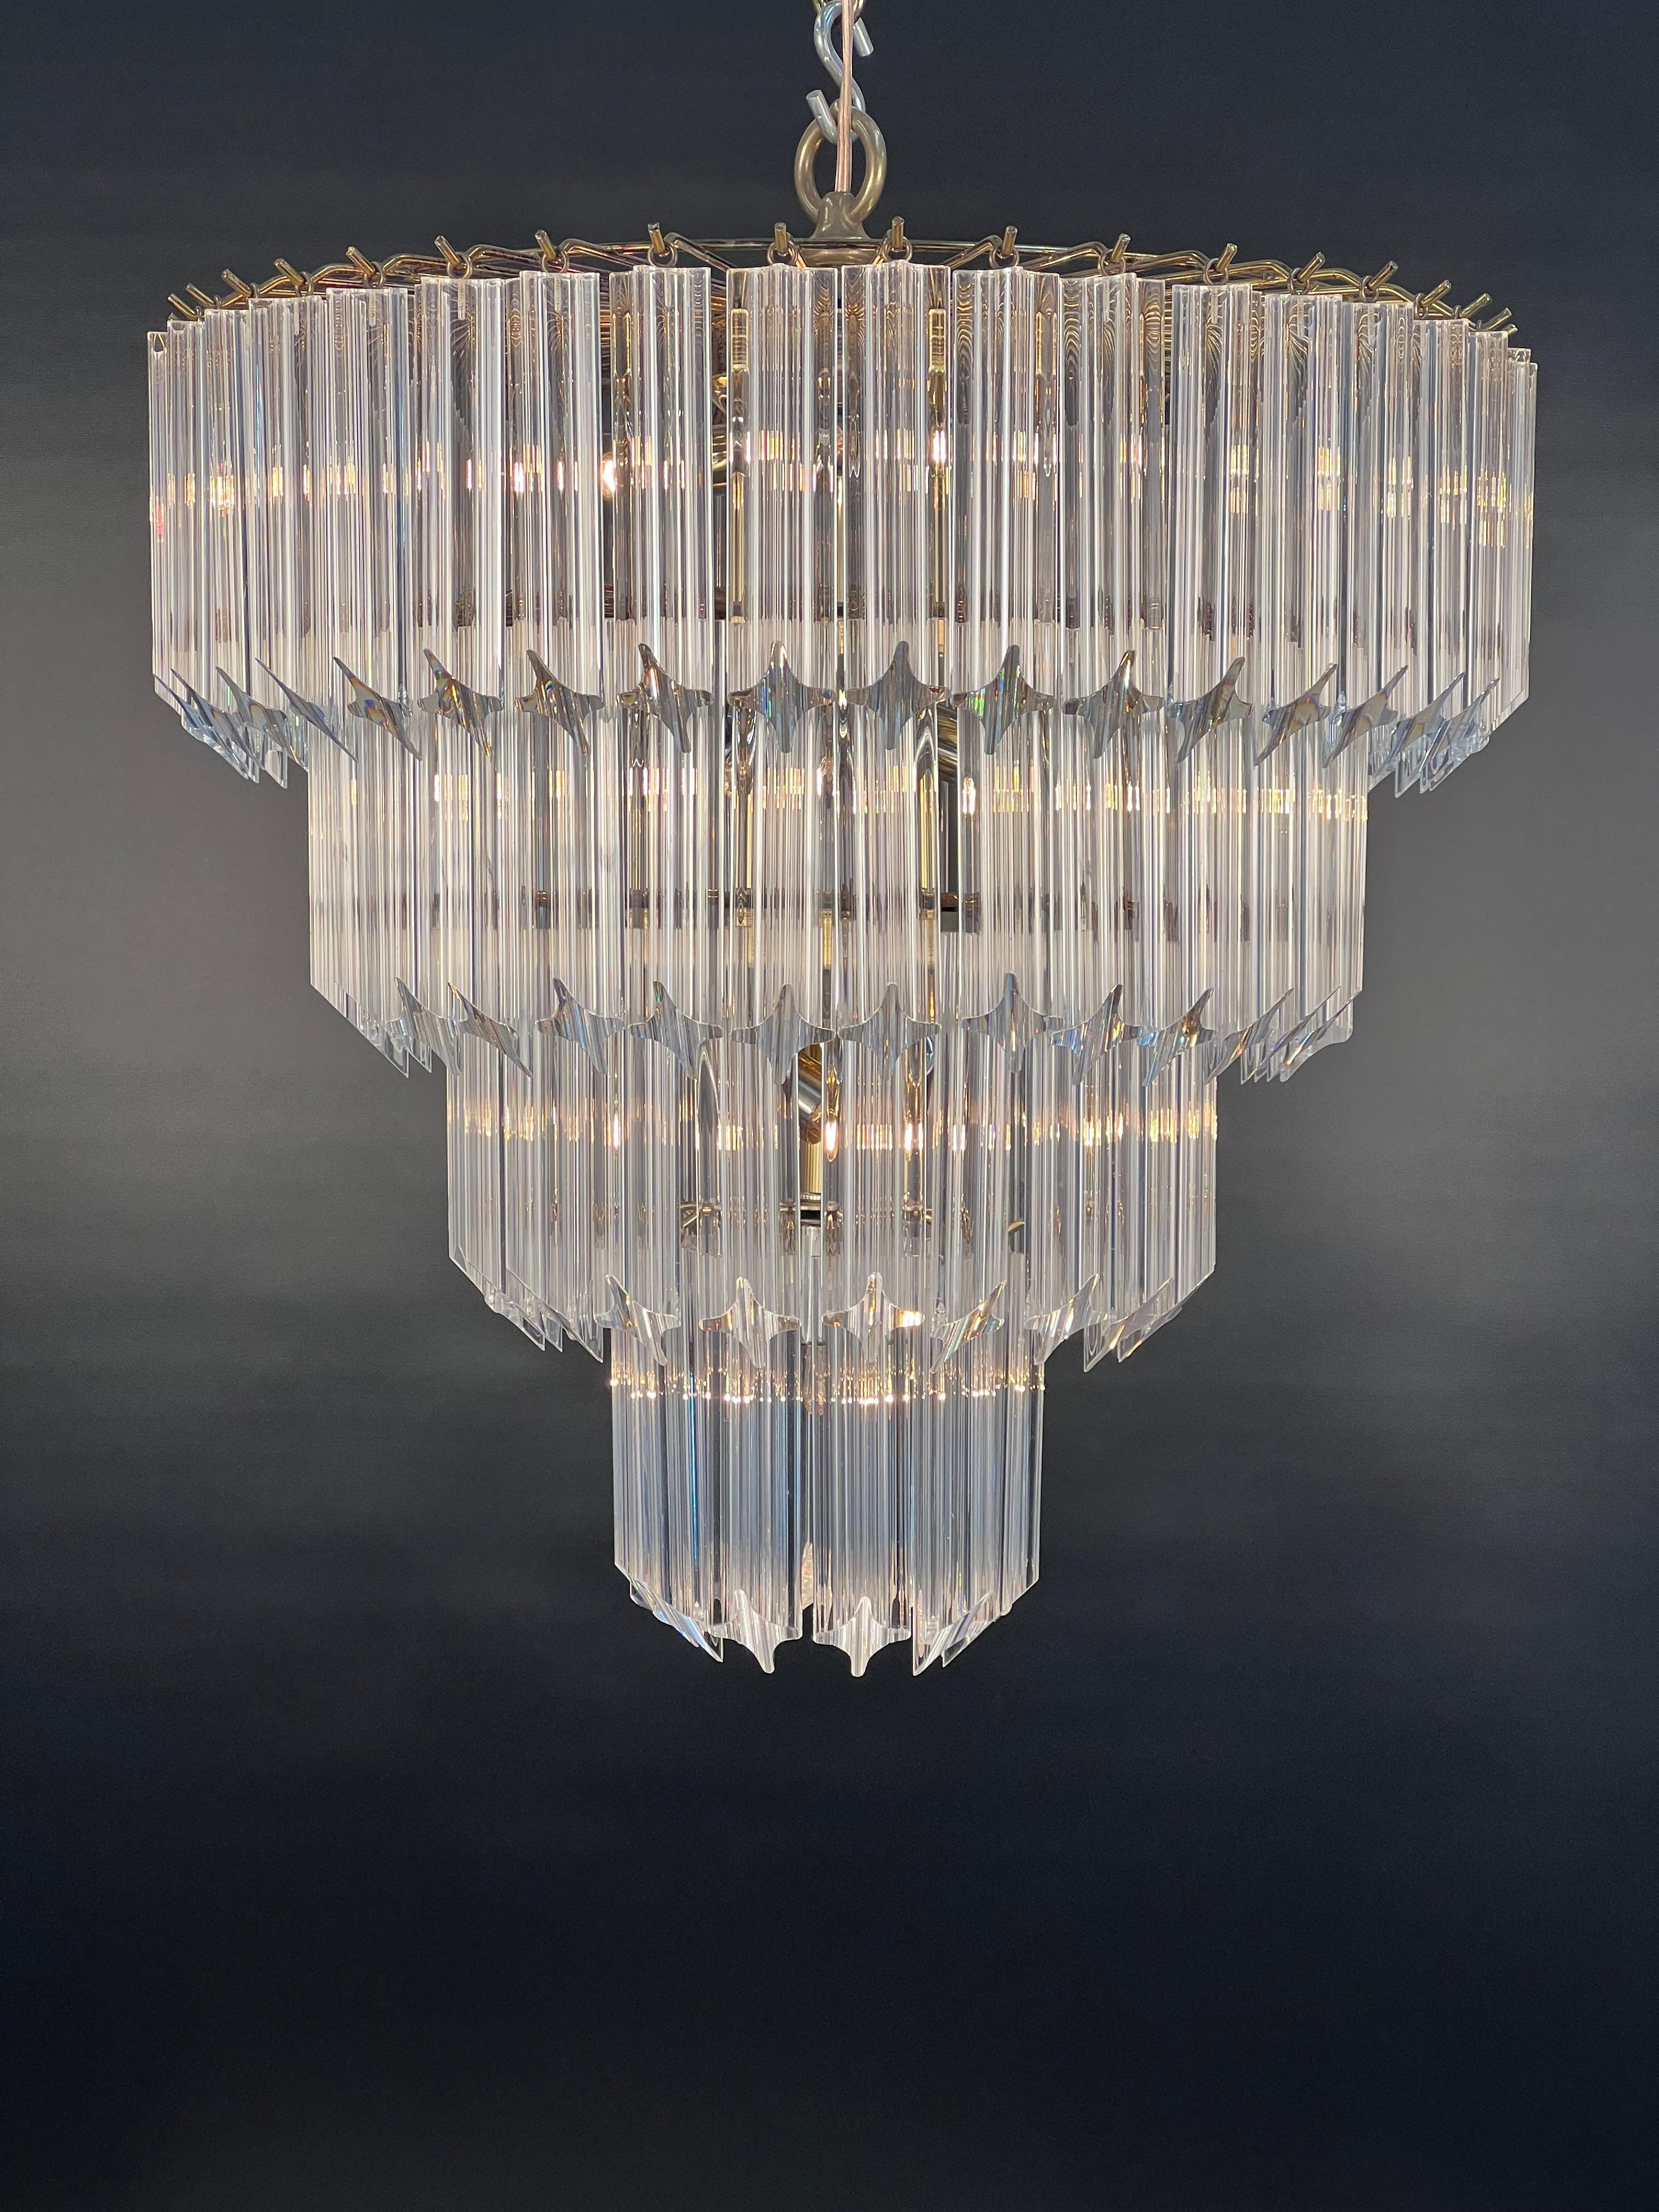 1960's Lucite acrylic cascading chandelier hung in the University of Northern Colorado's Grand Ballroom. The University of Northern Colorado located in Greeley Colorado built the grand ball room in the early 1960. This chandelier has been preserved